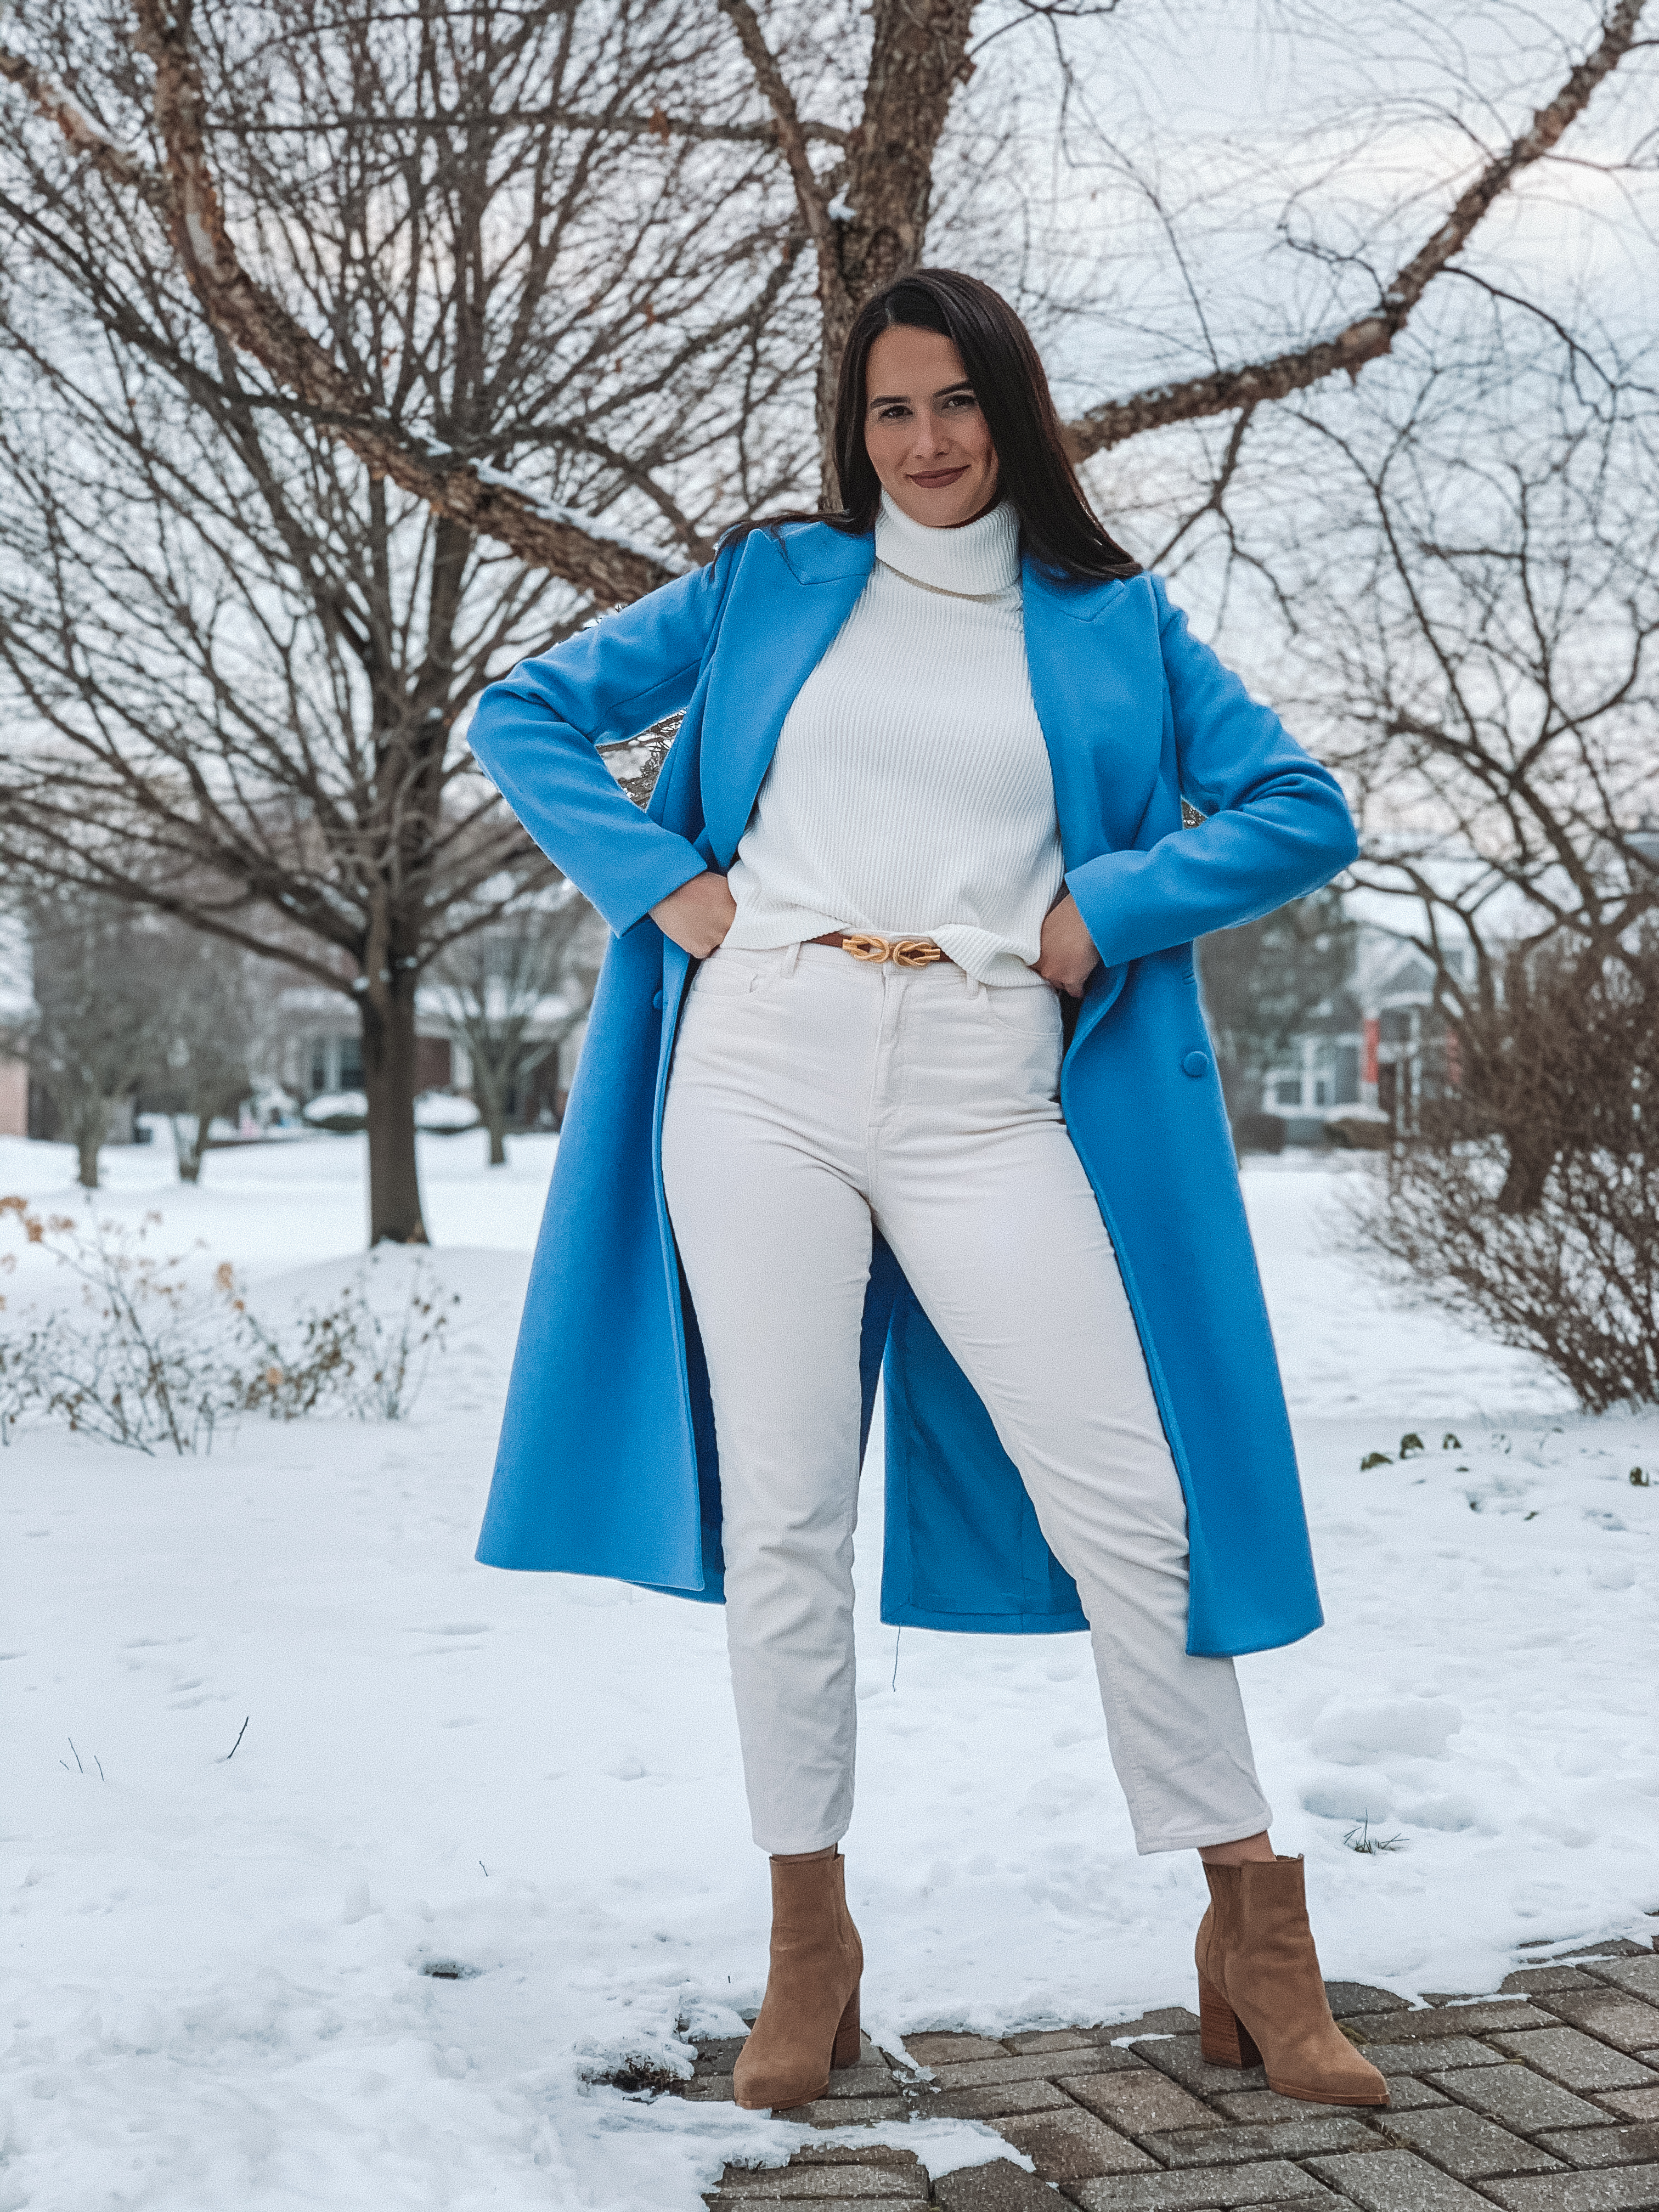 Blue Coat with Winter White Outfit in Snow